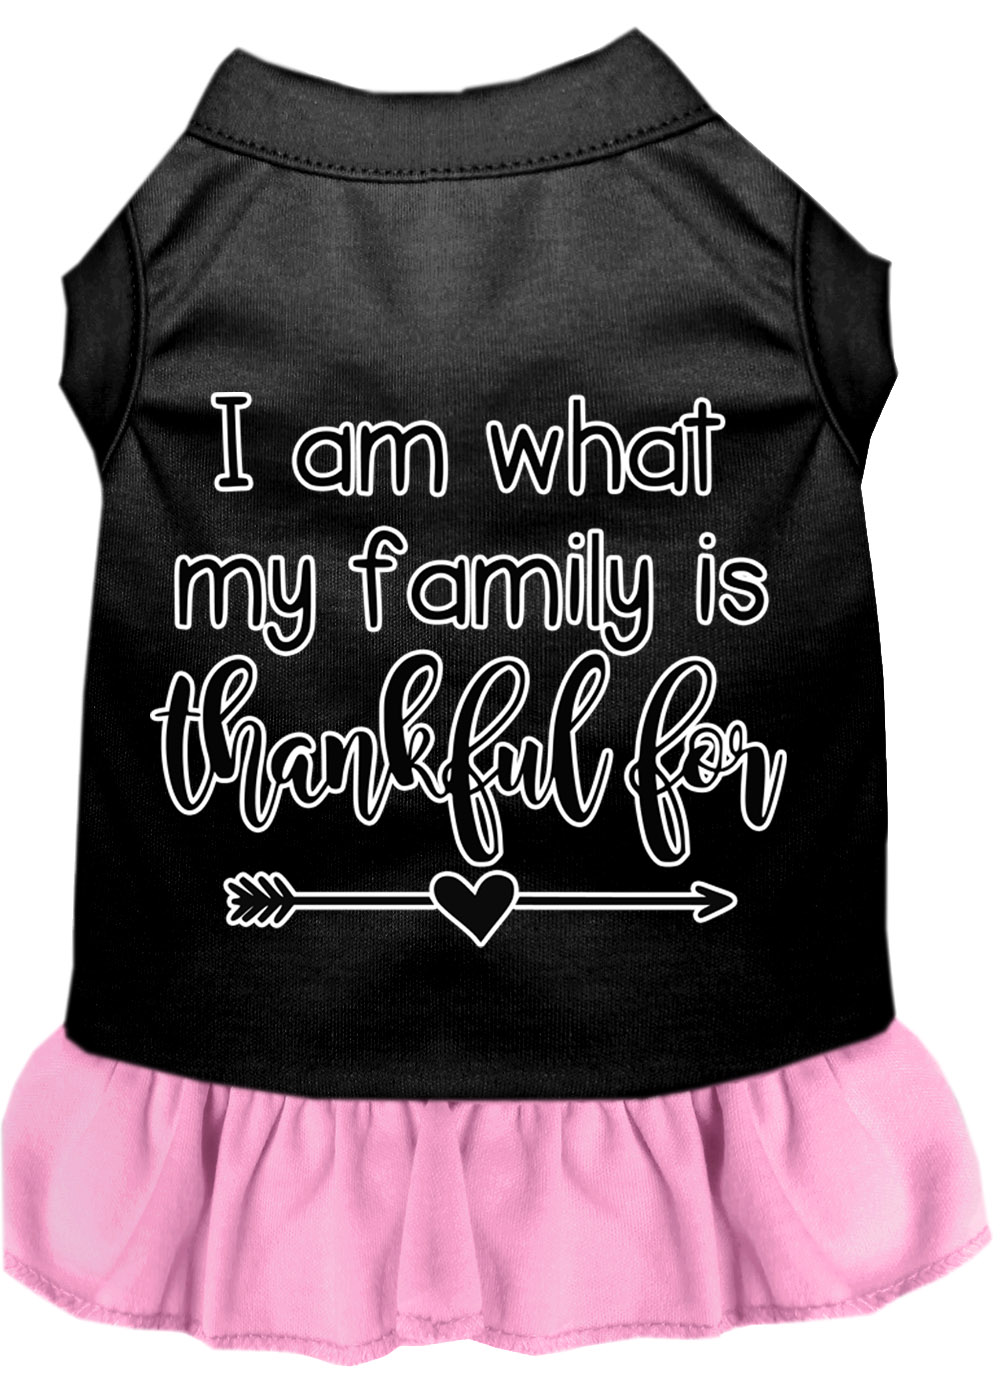 I Am What My Family is Thankful For Screen Print Dog Dress Black with Light Pink Lg